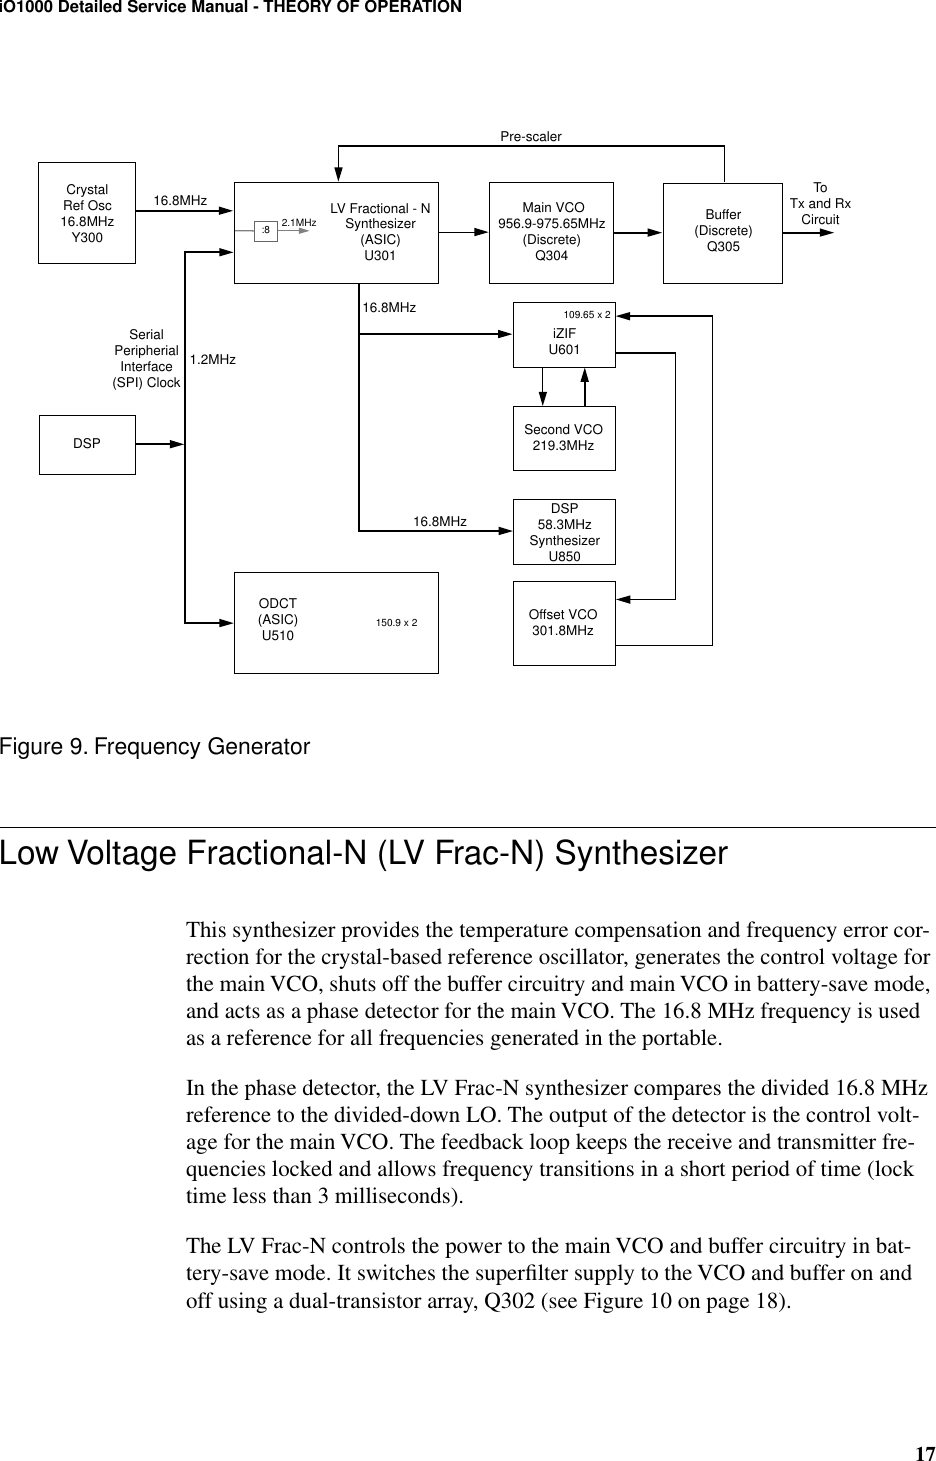 17iO1000 Detailed Service Manual - THEORY OF OPERATIONFigure 9. Frequency GeneratorLow Voltage Fractional-N (LV Frac-N) SynthesizerThis synthesizer provides the temperature compensation and frequency error cor-rection for the crystal-based reference oscillator, generates the control voltage for the main VCO, shuts off the buffer circuitry and main VCO in battery-save mode, and acts as a phase detector for the main VCO. The 16.8 MHz frequency is used as a reference for all frequencies generated in the portable.In the phase detector, the LV Frac-N synthesizer compares the divided 16.8 MHz reference to the divided-down LO. The output of the detector is the control volt-age for the main VCO. The feedback loop keeps the receive and transmitter fre-quencies locked and allows frequency transitions in a short period of time (lock time less than 3 milliseconds).The LV Frac-N controls the power to the main VCO and buffer circuitry in bat-tery-save mode. It switches the superﬁlter supply to the VCO and buffer on and off using a dual-transistor array, Q302 (see Figure 10 on page 18).Second VCO219.3MHzDSP58.3MHzSynthesizerU850Offset VCO301.8MHz16.8MHz16.8MHzPre-scaler Main VCO956.9-975.65MHz(Discrete)Q304LV Fractional - NSynthesizer(ASIC)U3012.1MHz:8ODCT(ASIC)U510150.9 x 2109.65 x 2DSP1.2MHzSerialPeripherialInterface(SPI) Clock16.8MHzCrystalRef Osc16.8MHzY300Buffer(Discrete)Q305ToTx and RxCircuitiZIFU601